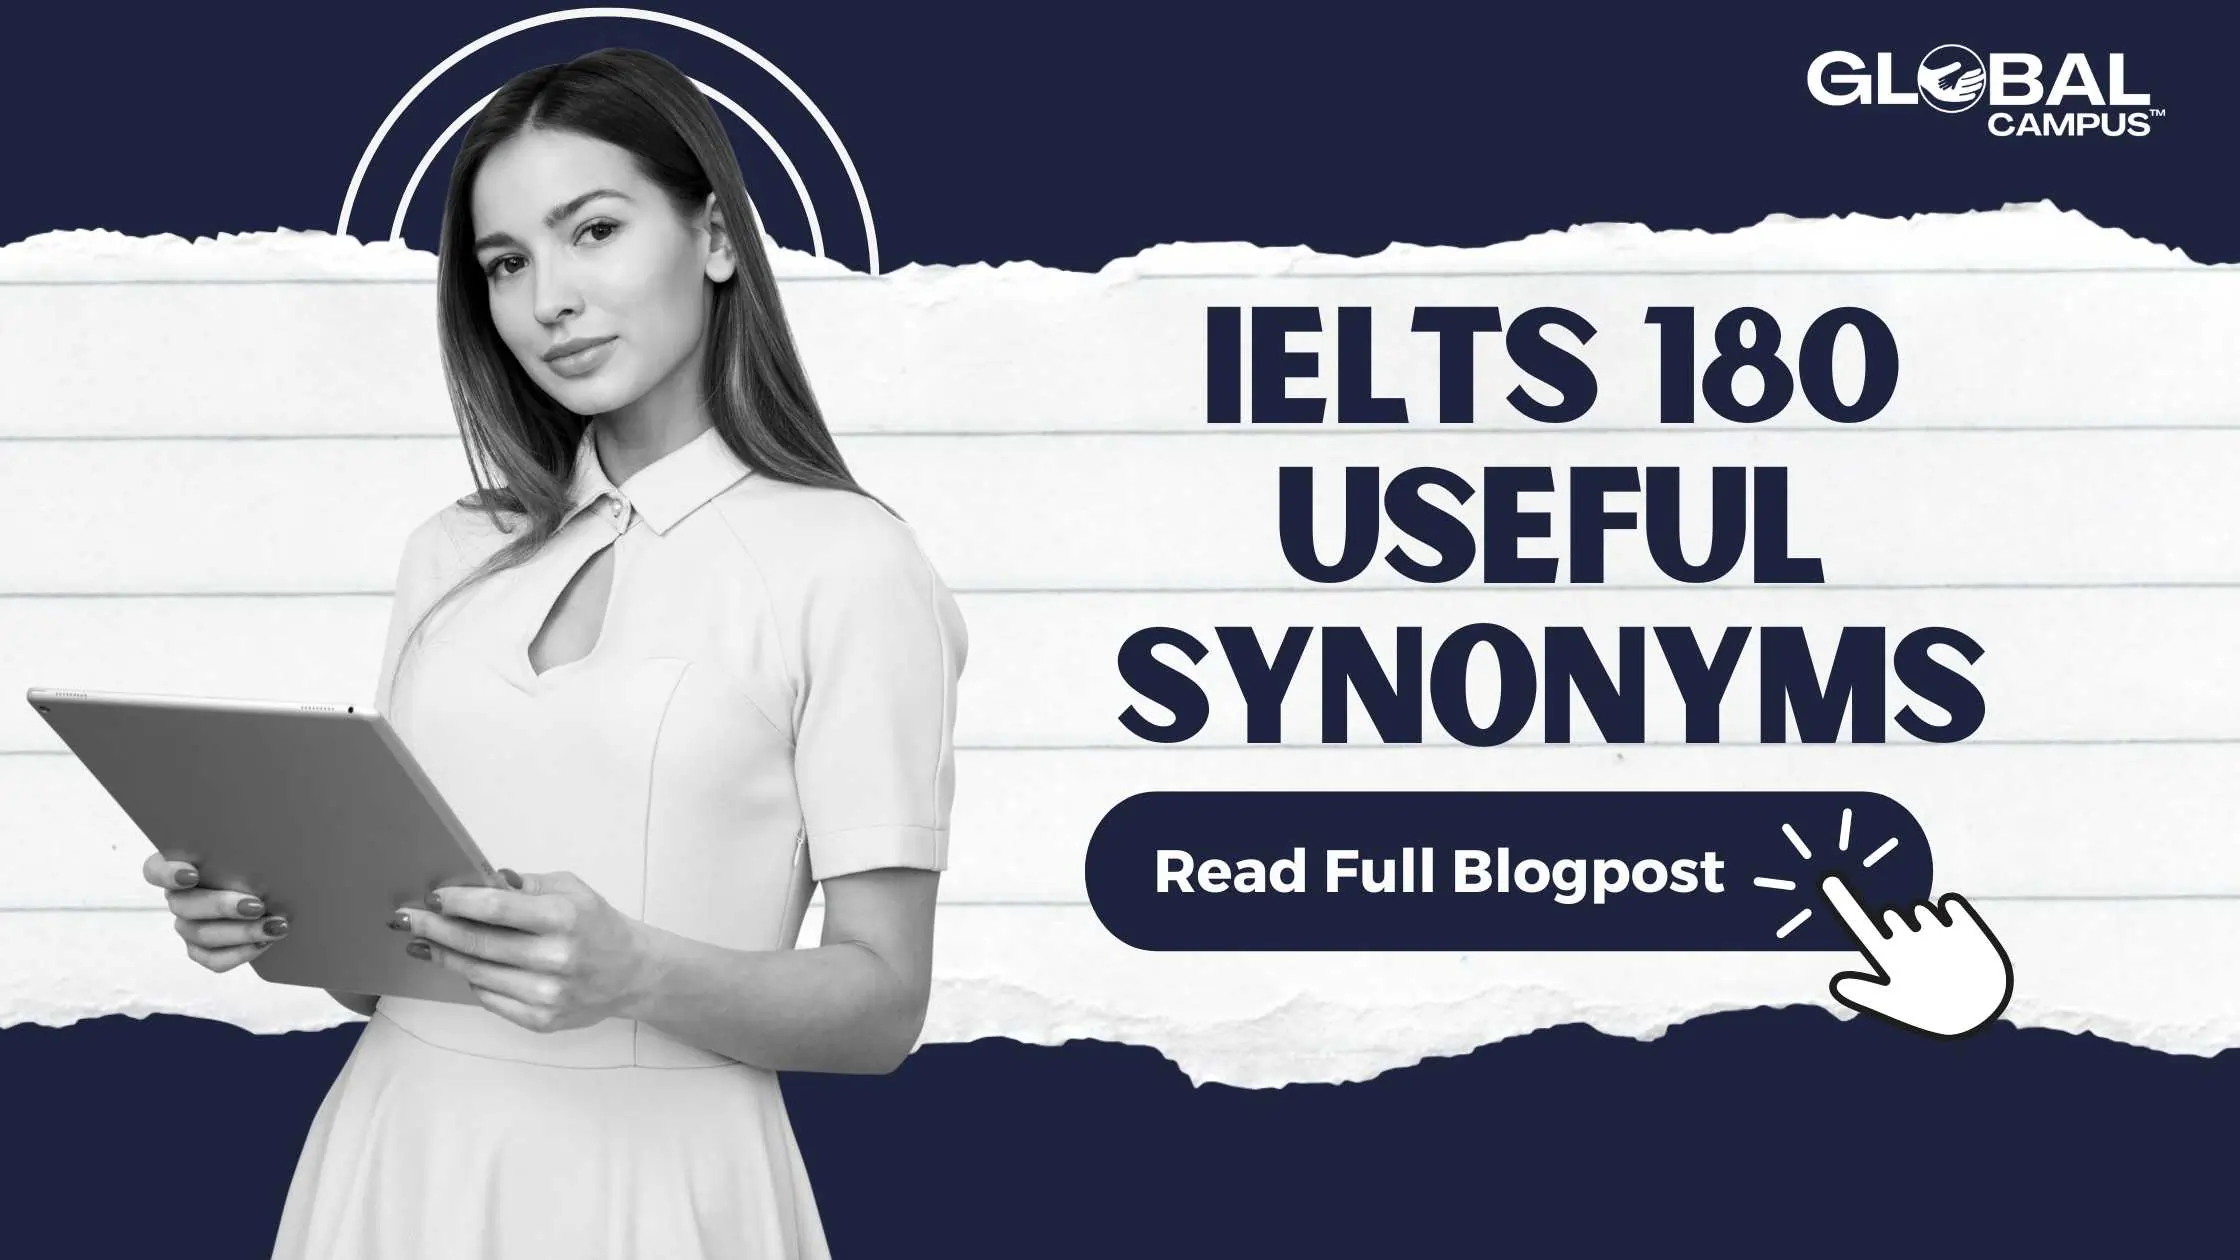 A Girl standing with a tablet & ready to teach IELTS 180 Useful Synonyms Vocabulary.